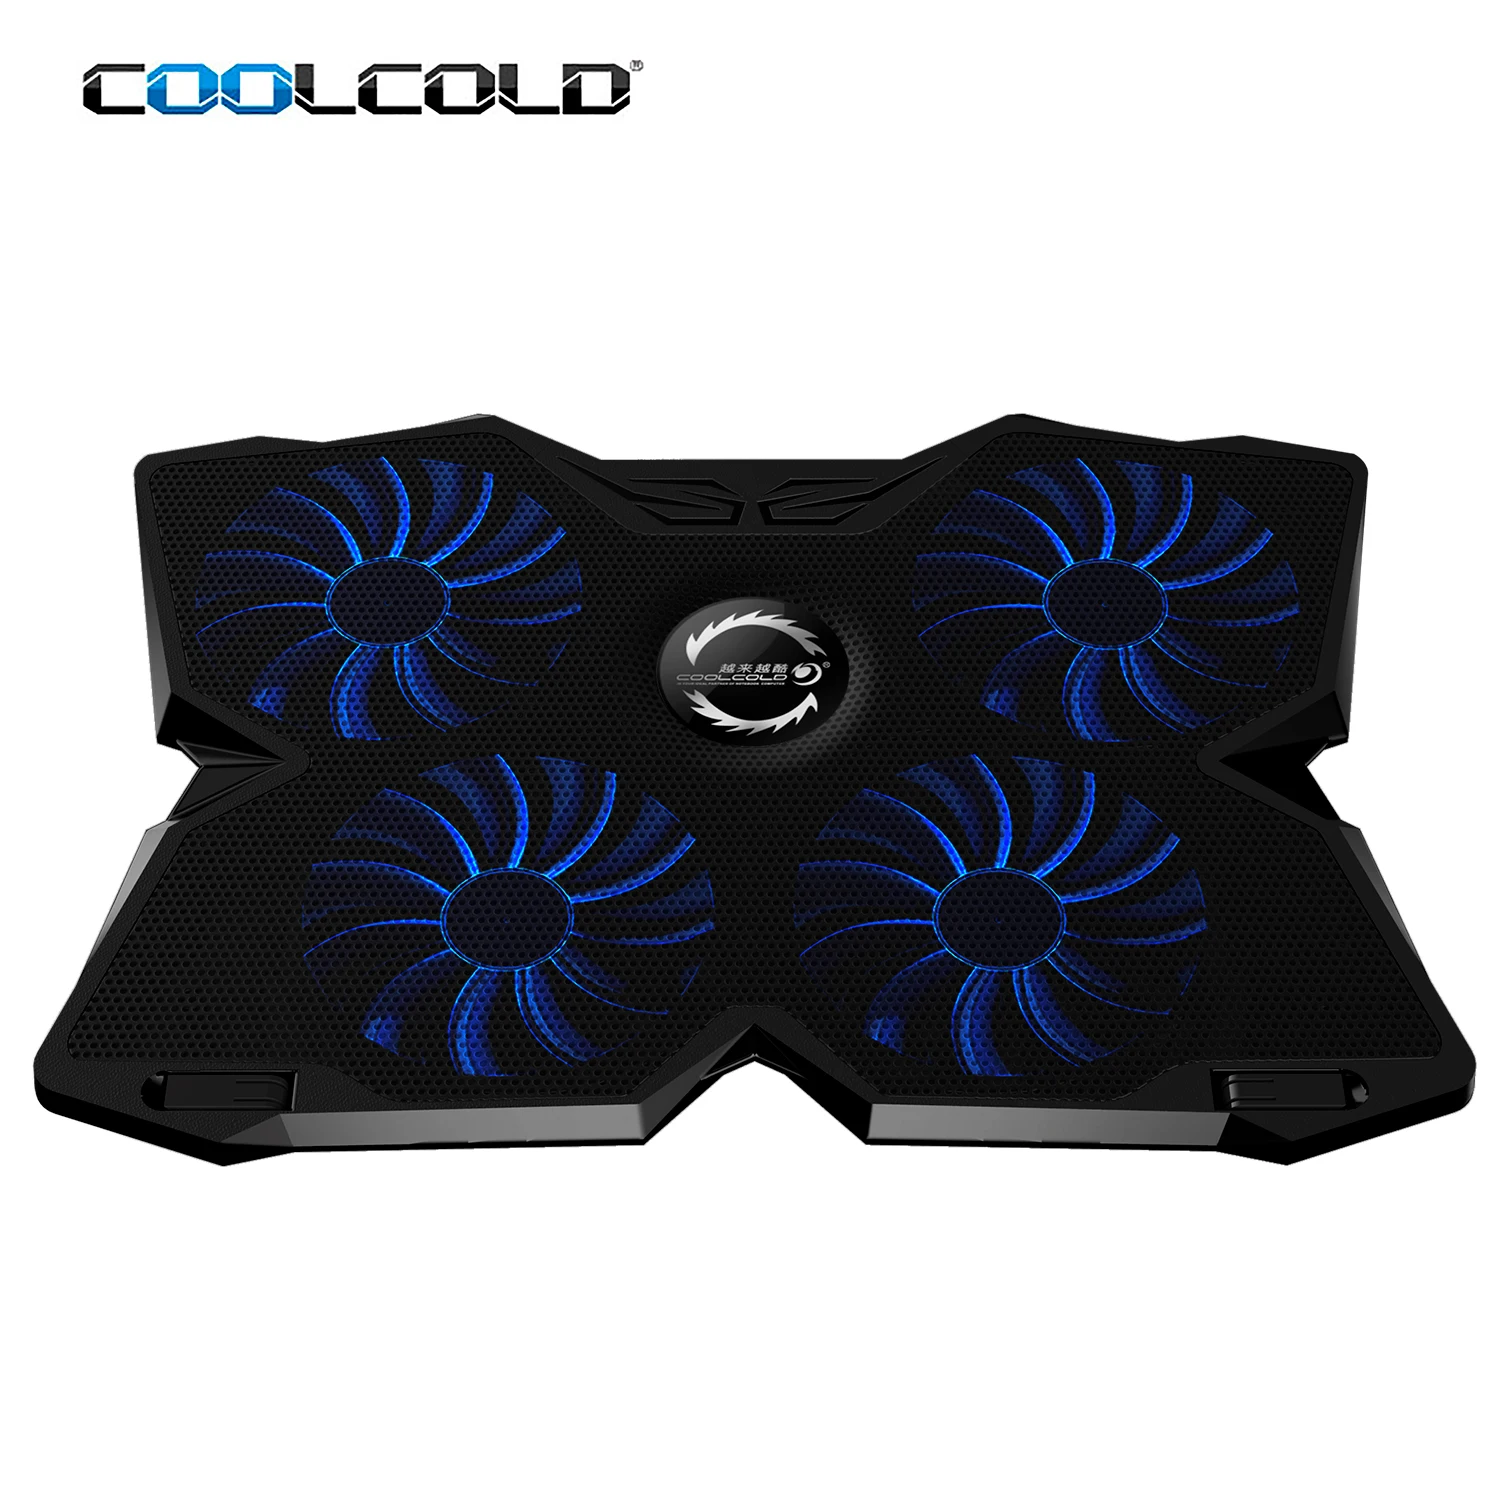 17.3 inch notebook cooler stand tablet PC gamer laptop cooler cooling pad